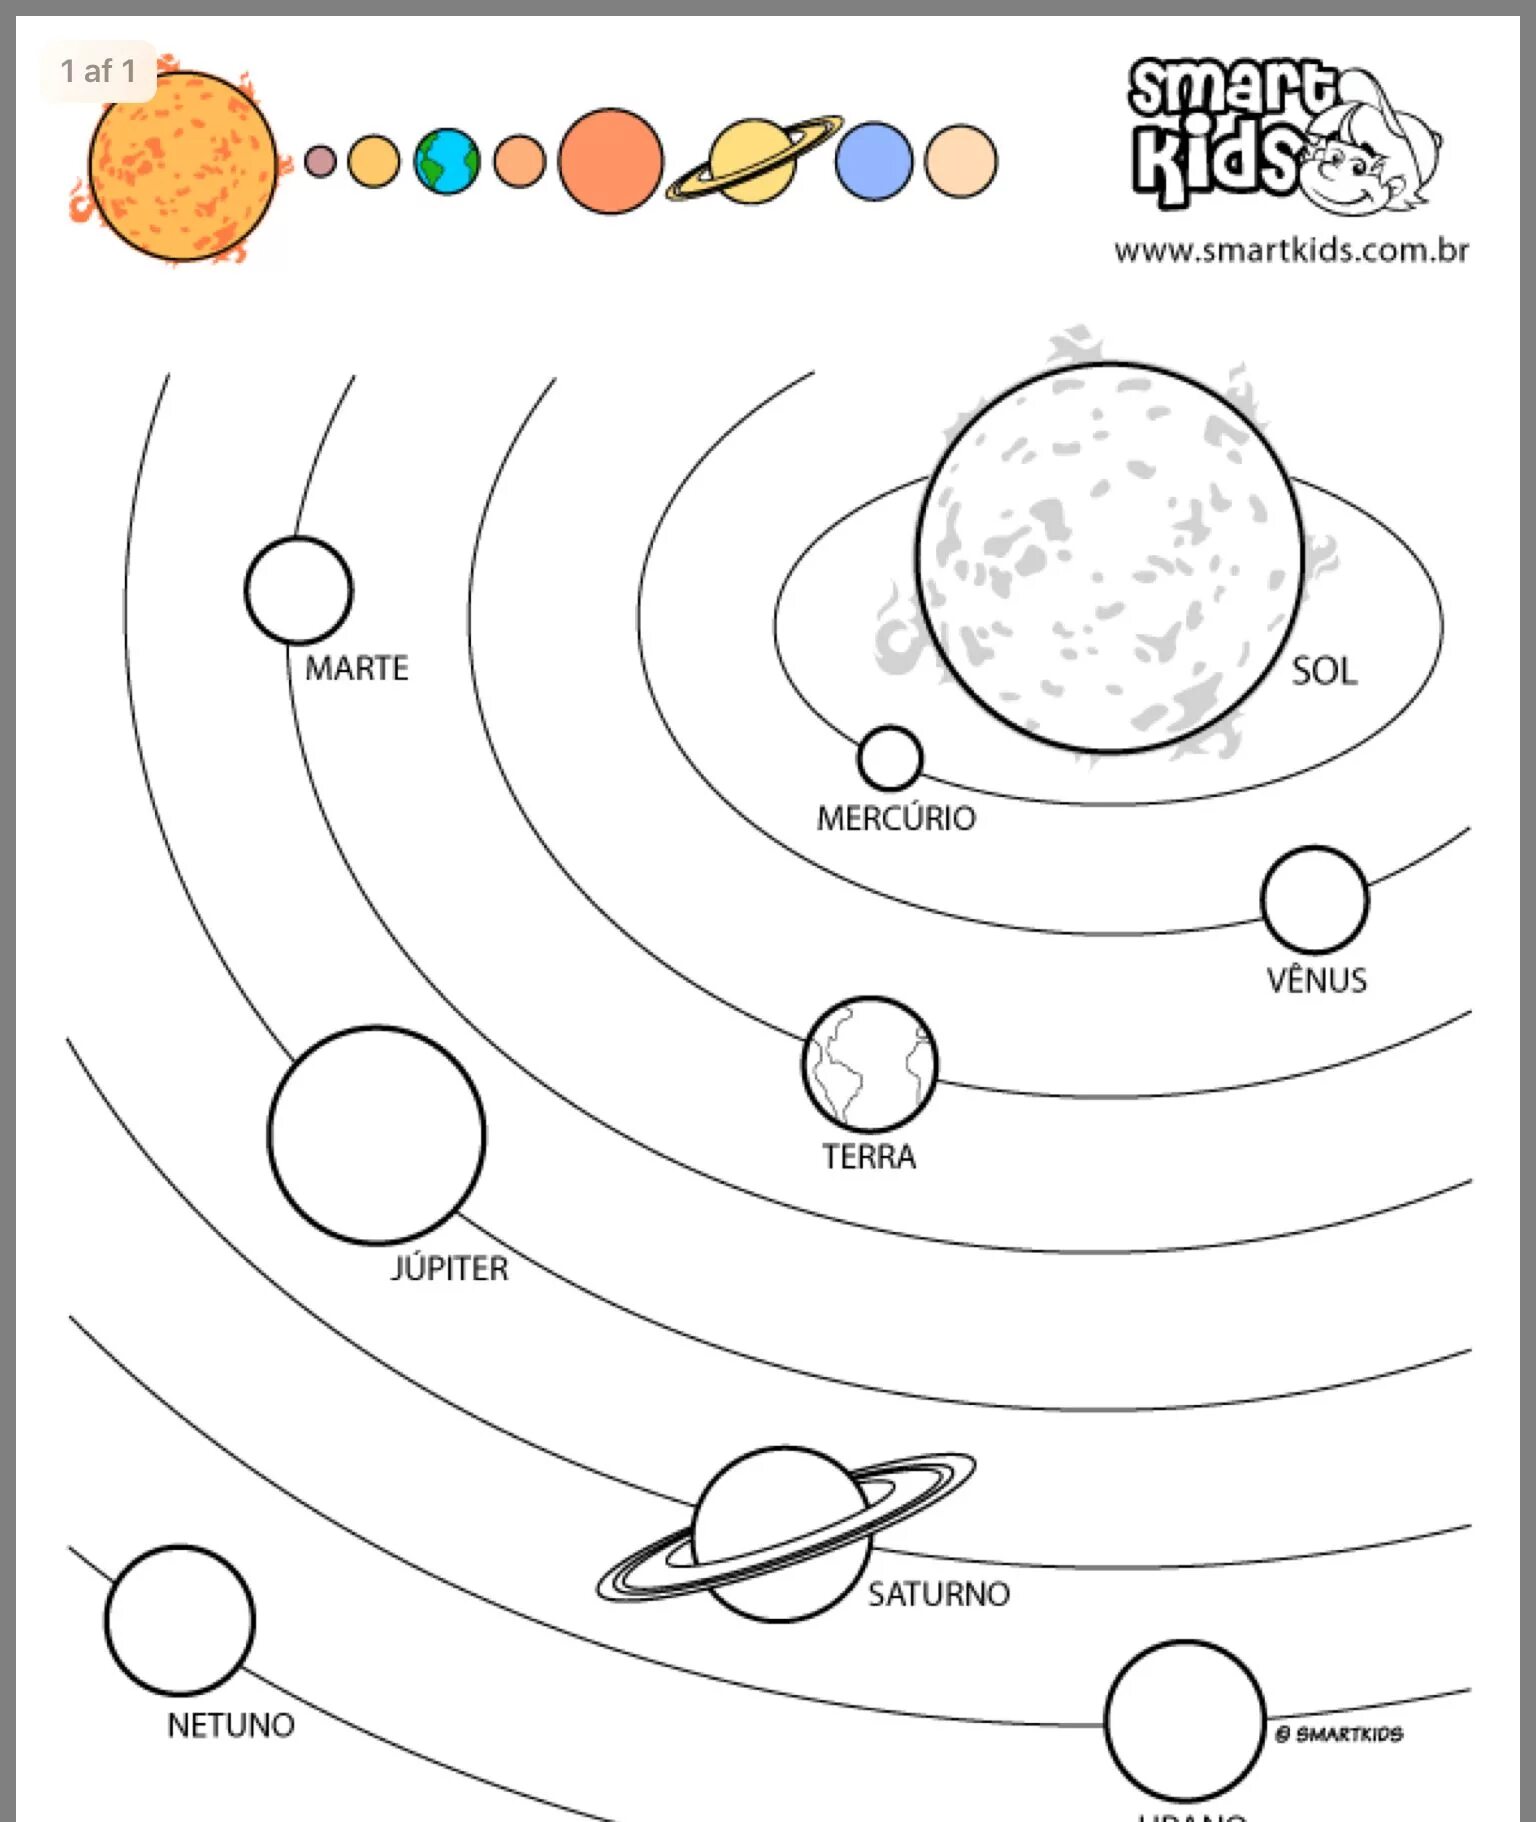 Wonderful coloring of all planets